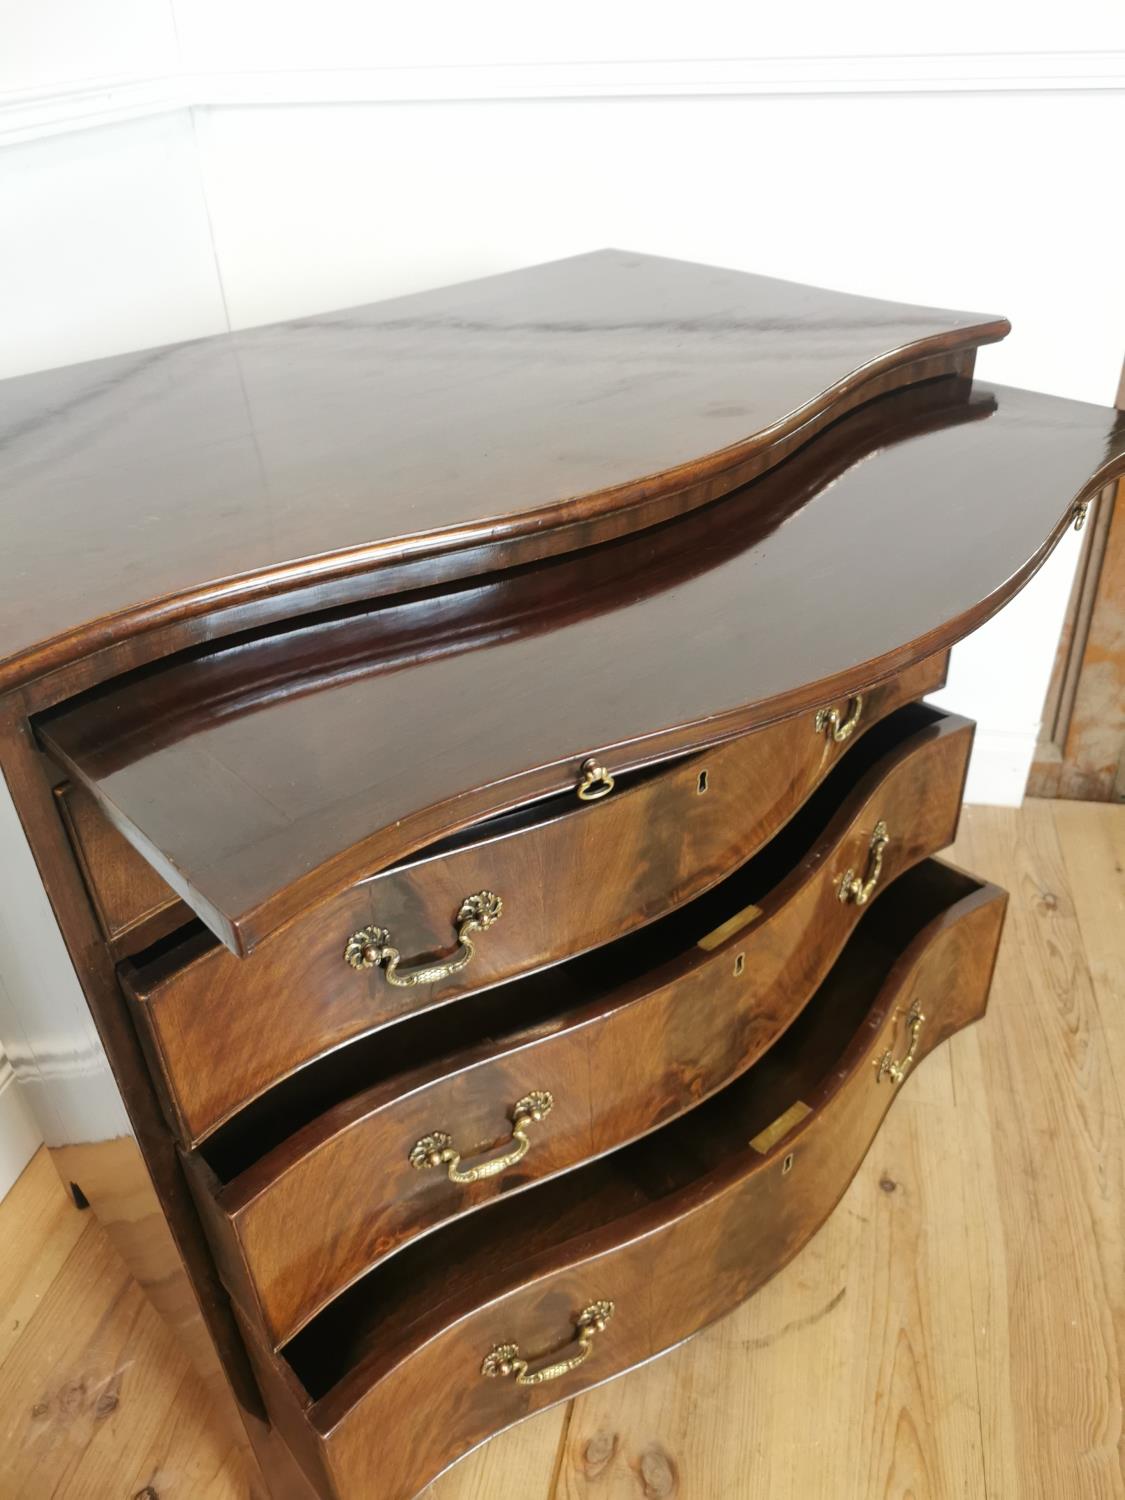 Good quality Edwardian serpentine fronted chest of drawers - Image 6 of 6